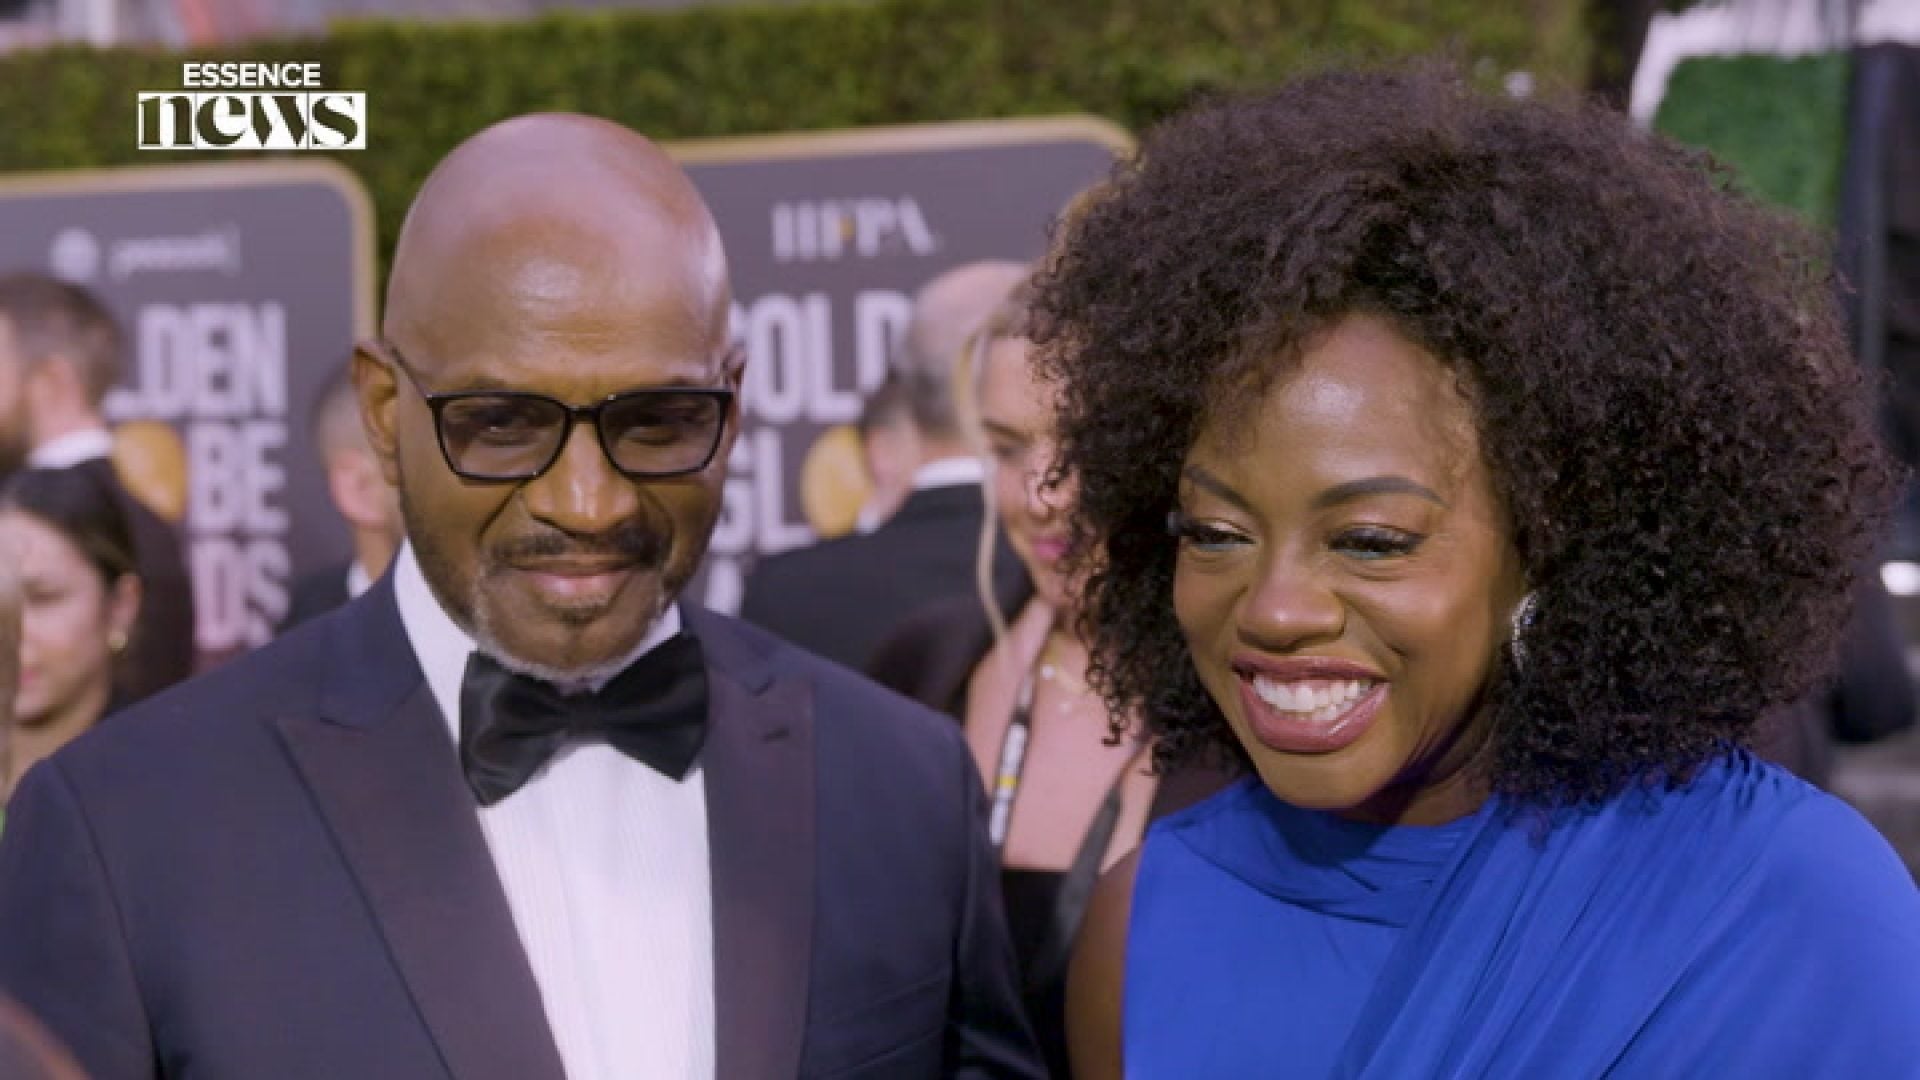 WATCH: Viola Davis Talks About The Success of The Woman King